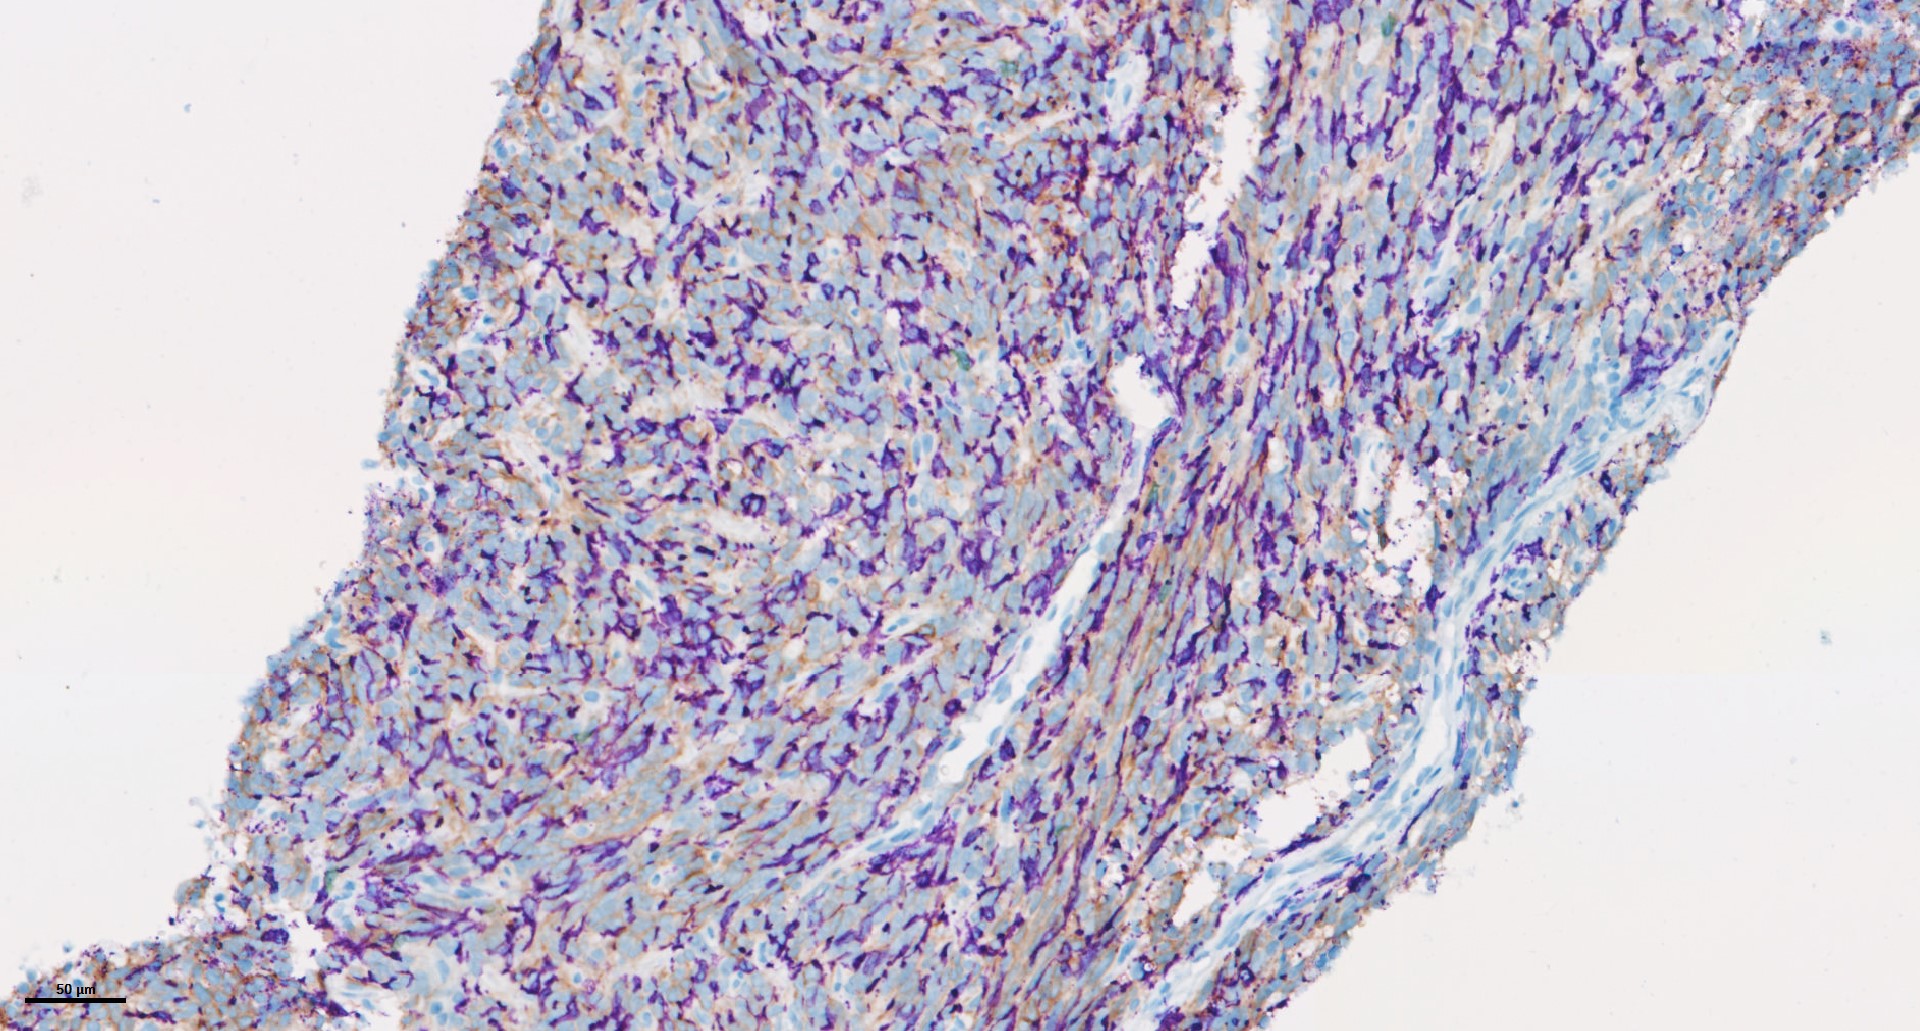 Multiplexed-IHC of ovarian cancer in a clinical study combining Trabectedin ans Durvalumab